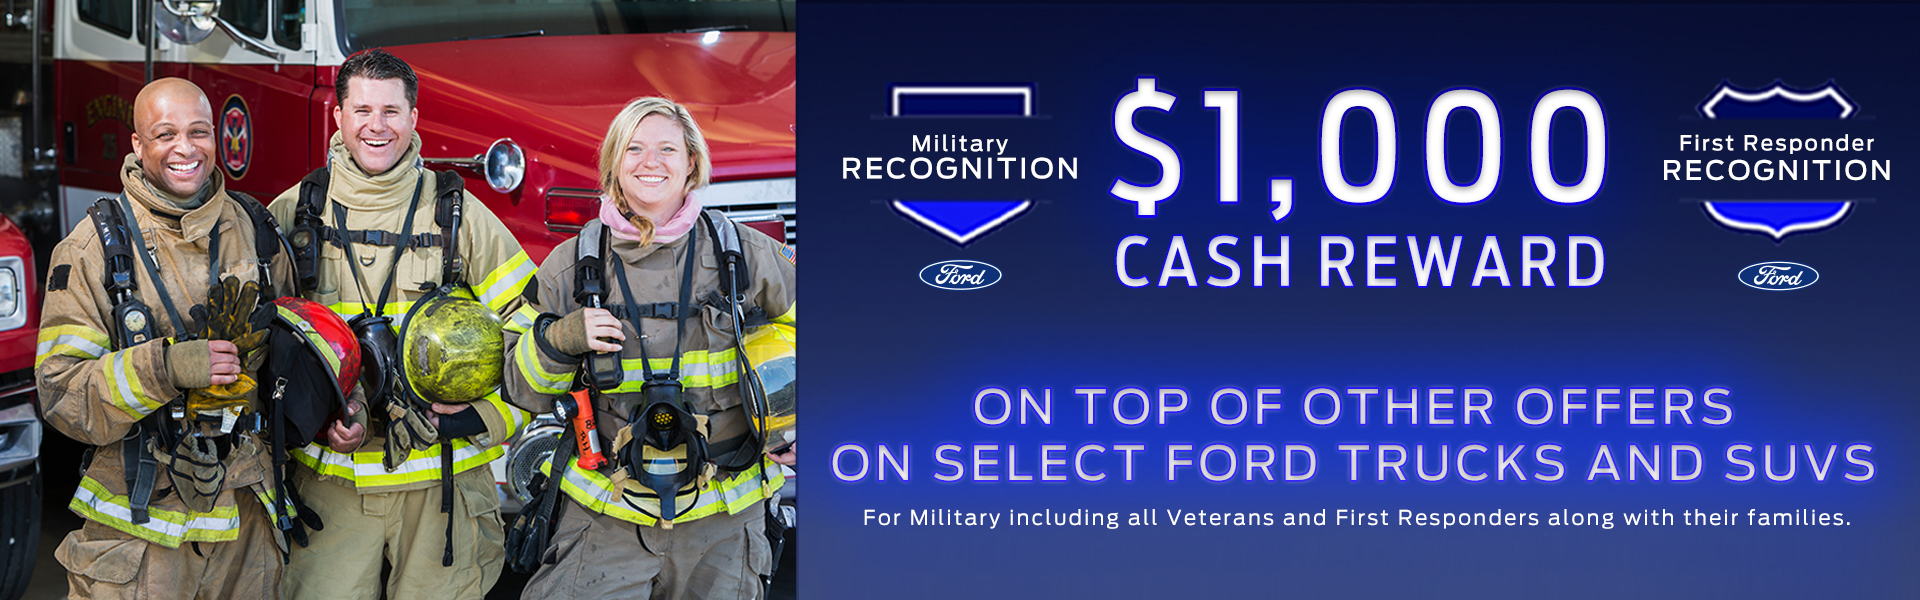 $1,000 Cash Reward For Military & First Responders